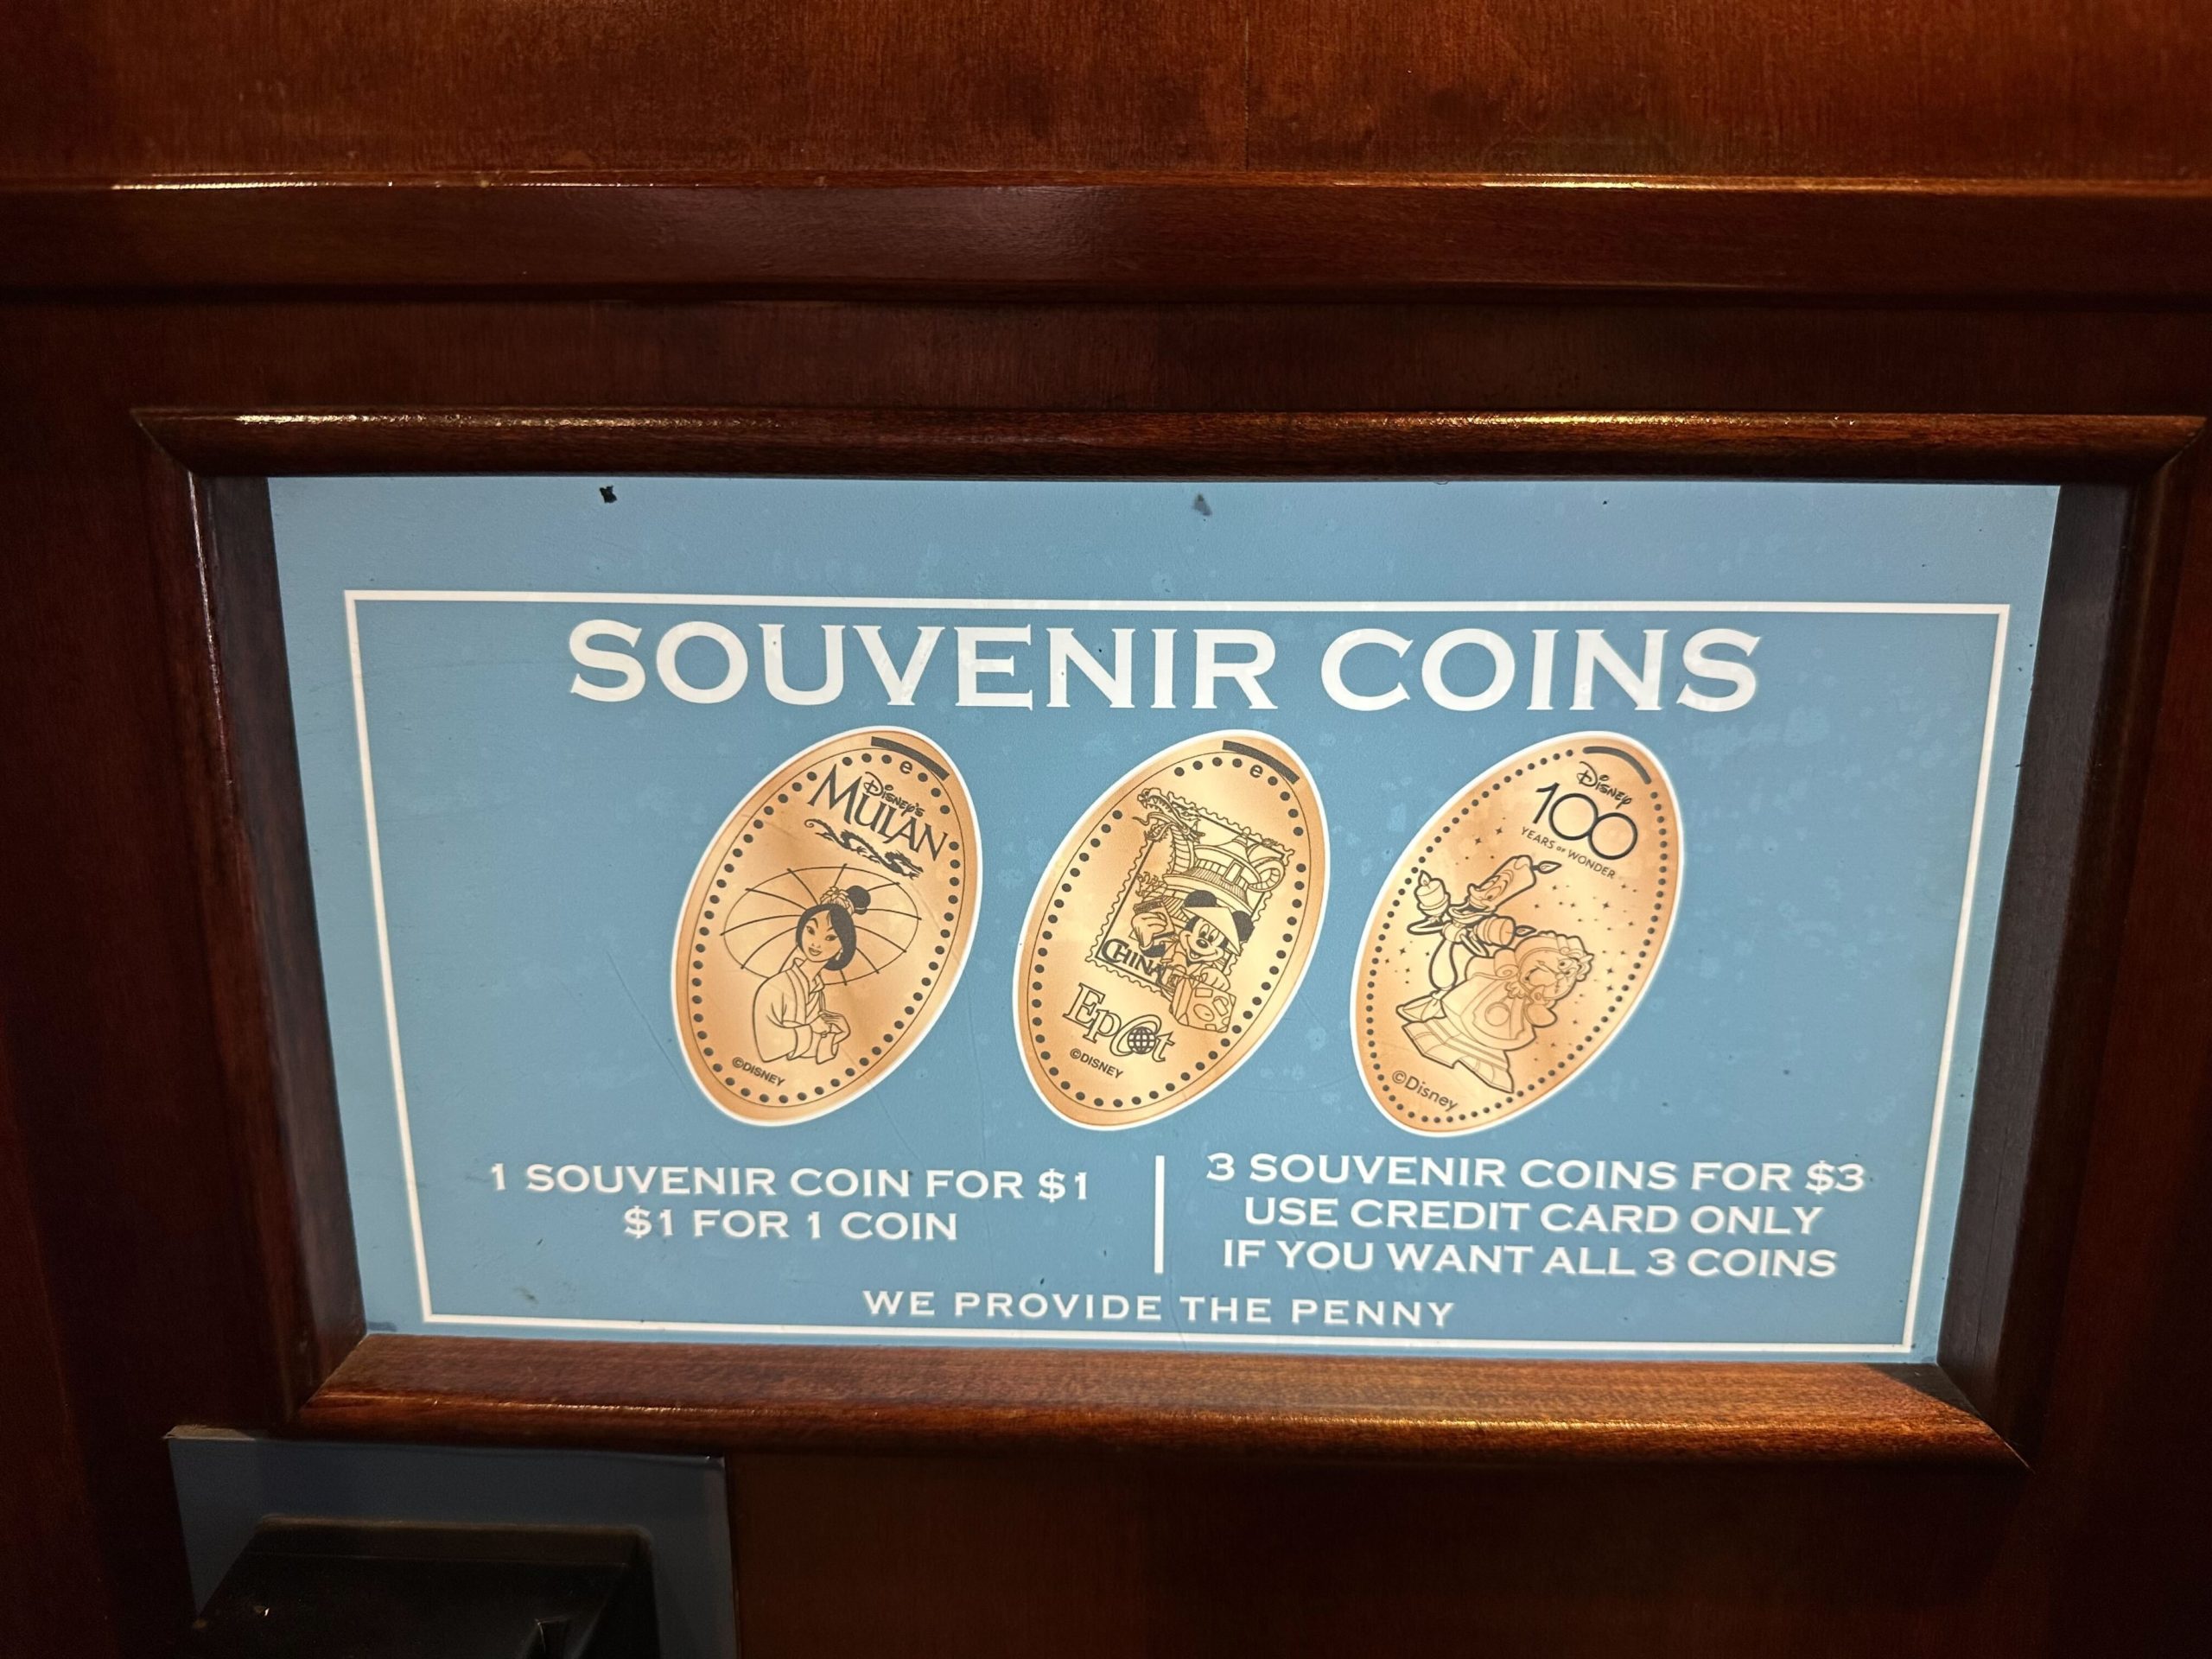 Disney100 pressed penny at world traveler in Epcot